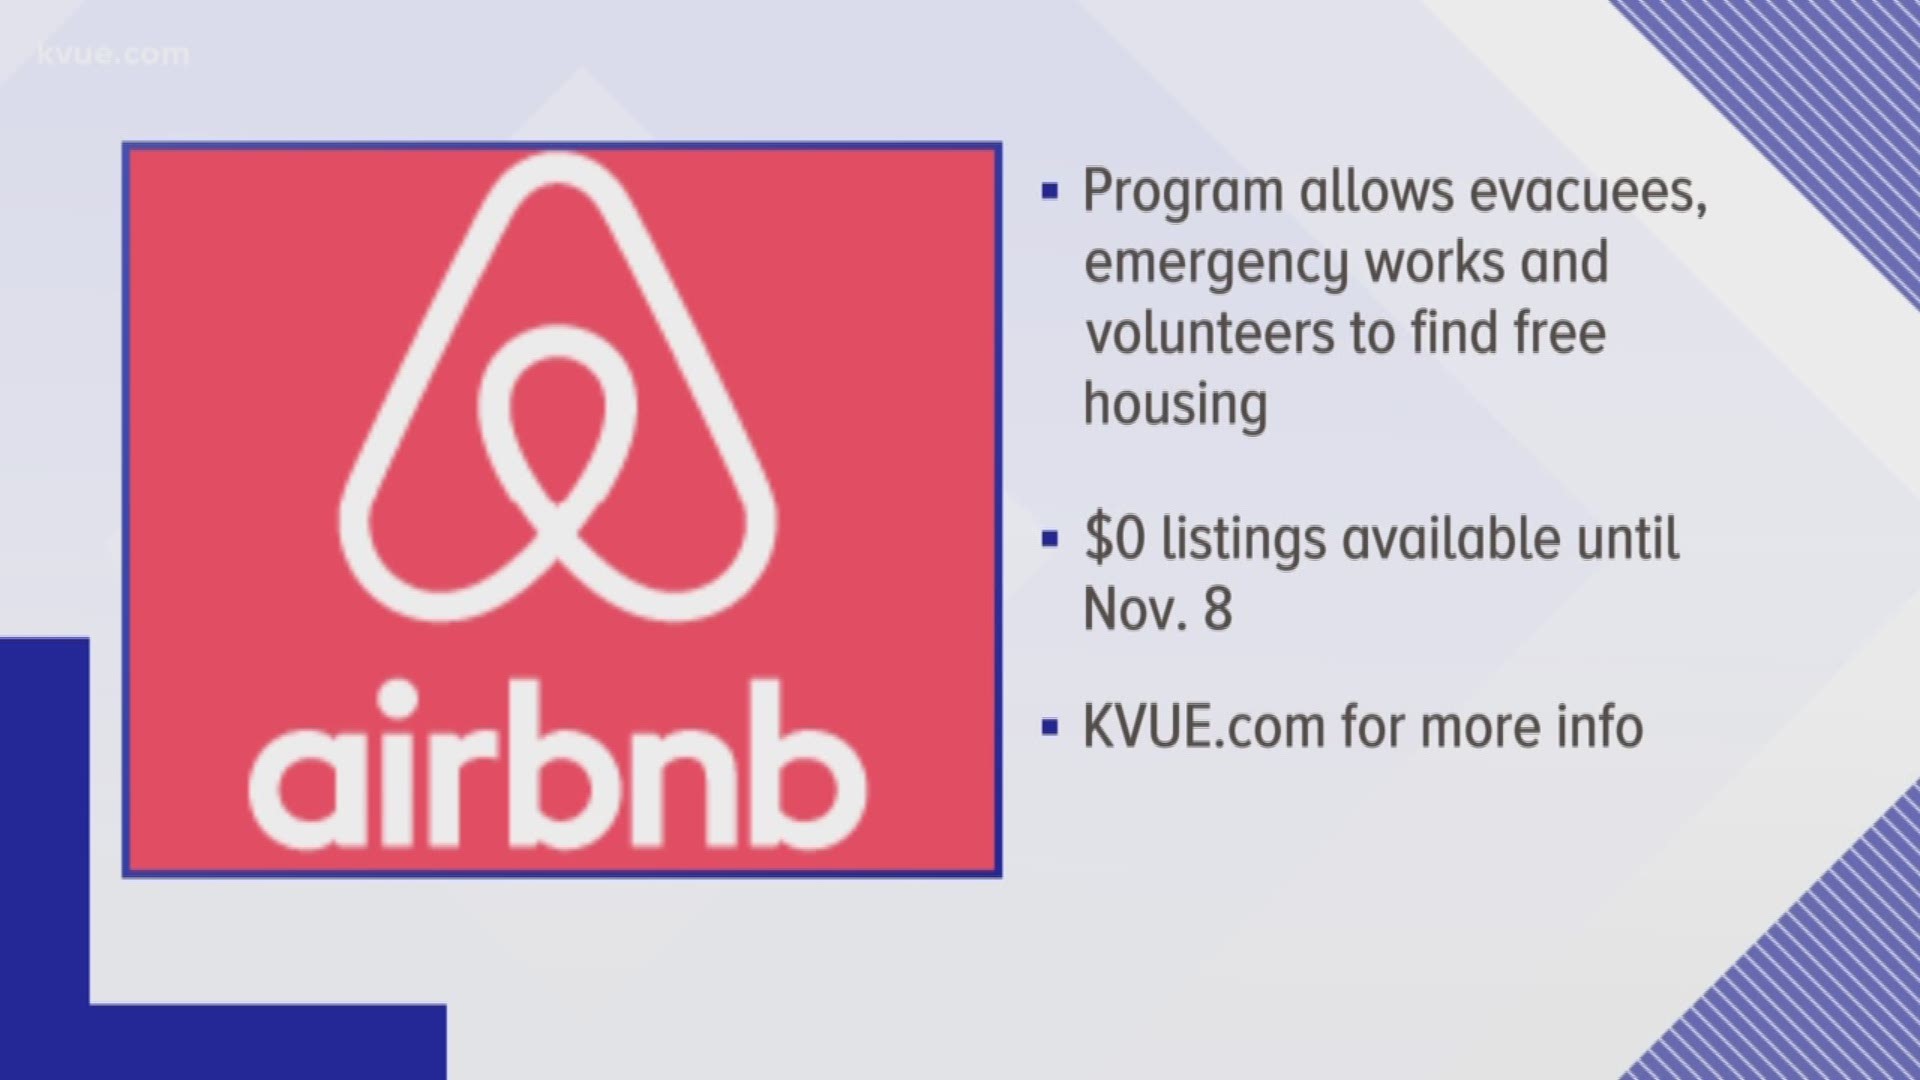 Towns along the Llano and Colorado rivers such as Llano, Kingsland and Marble Falls were hugely impacted, with hundreds of people forced to evacuate their homes.

In order to help those displaced, Airbnb is offering free temporary housing to help Central